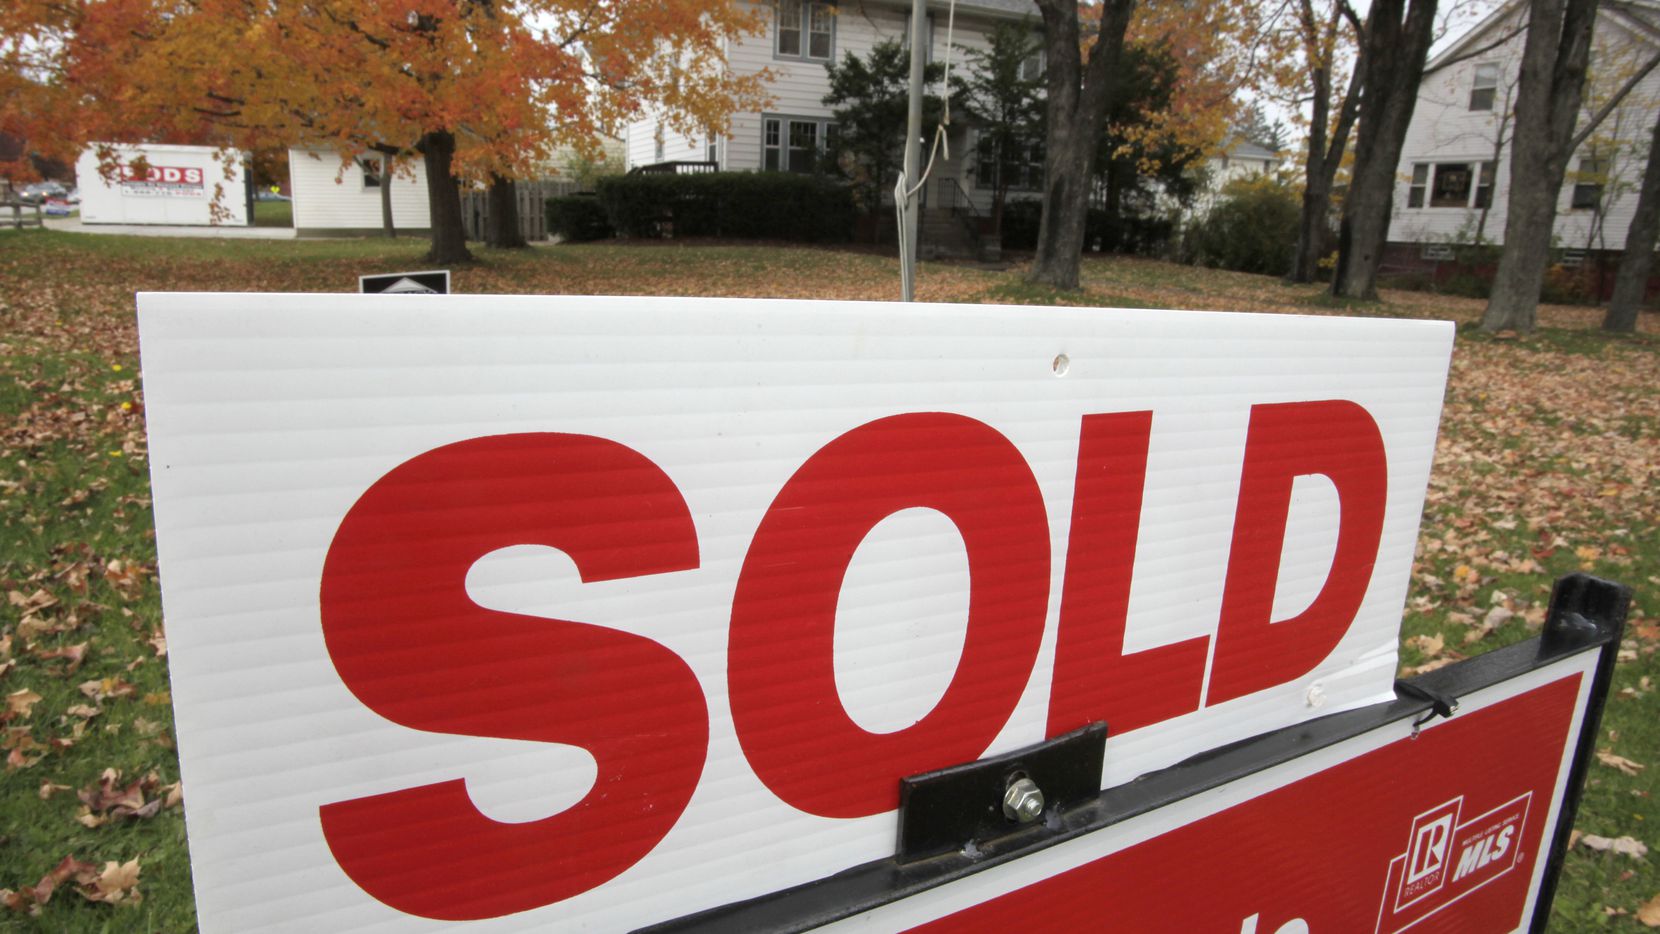 The share of Dallas homes sold to non-occupant buyers was the highest since 2000, according to Attom Data Solutions.